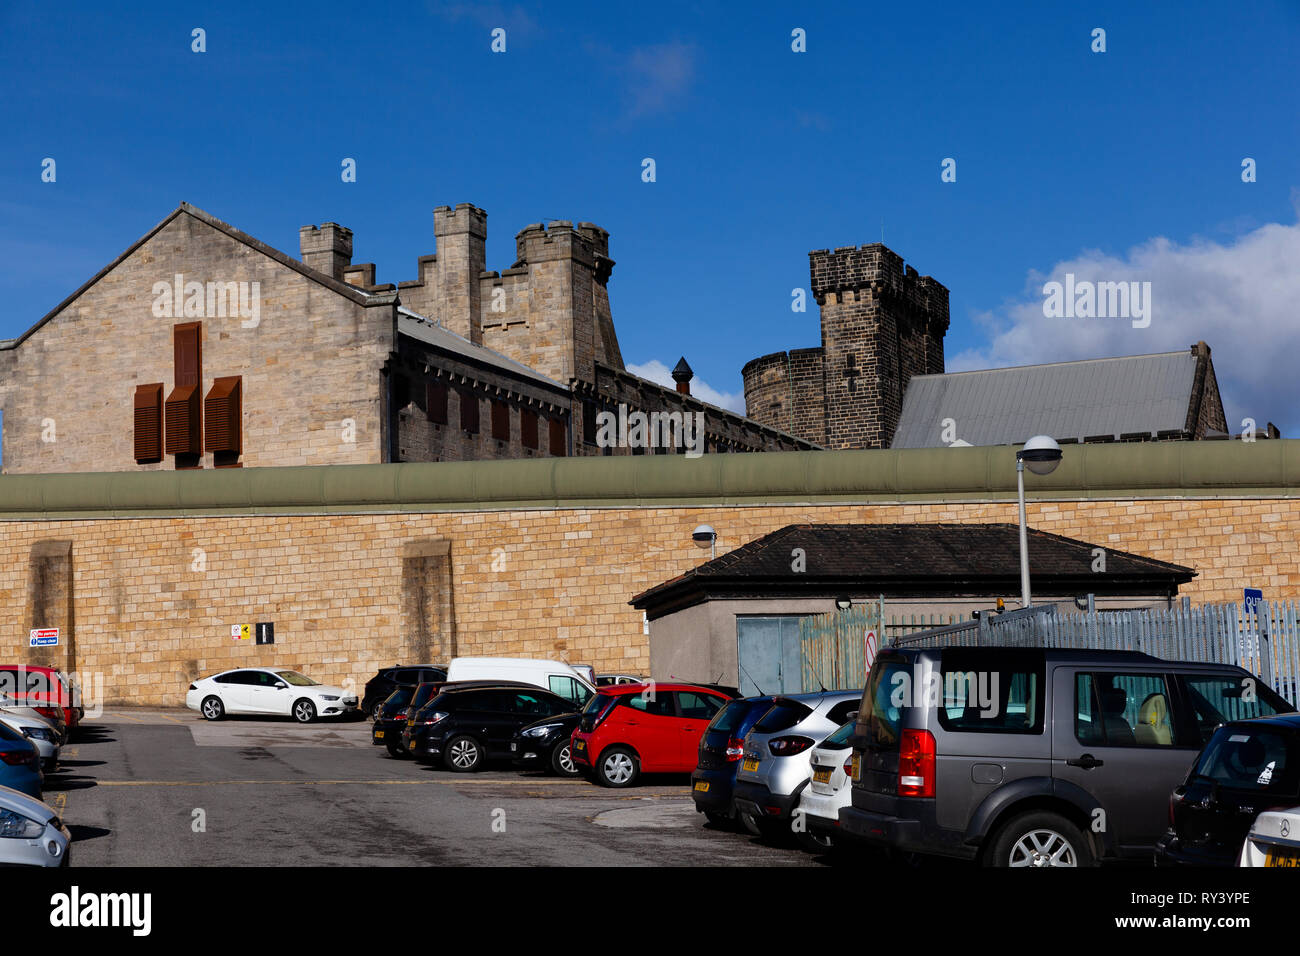 HMPrison Armley. Leeds. An historical prison in Yorkshire. Stock Photo